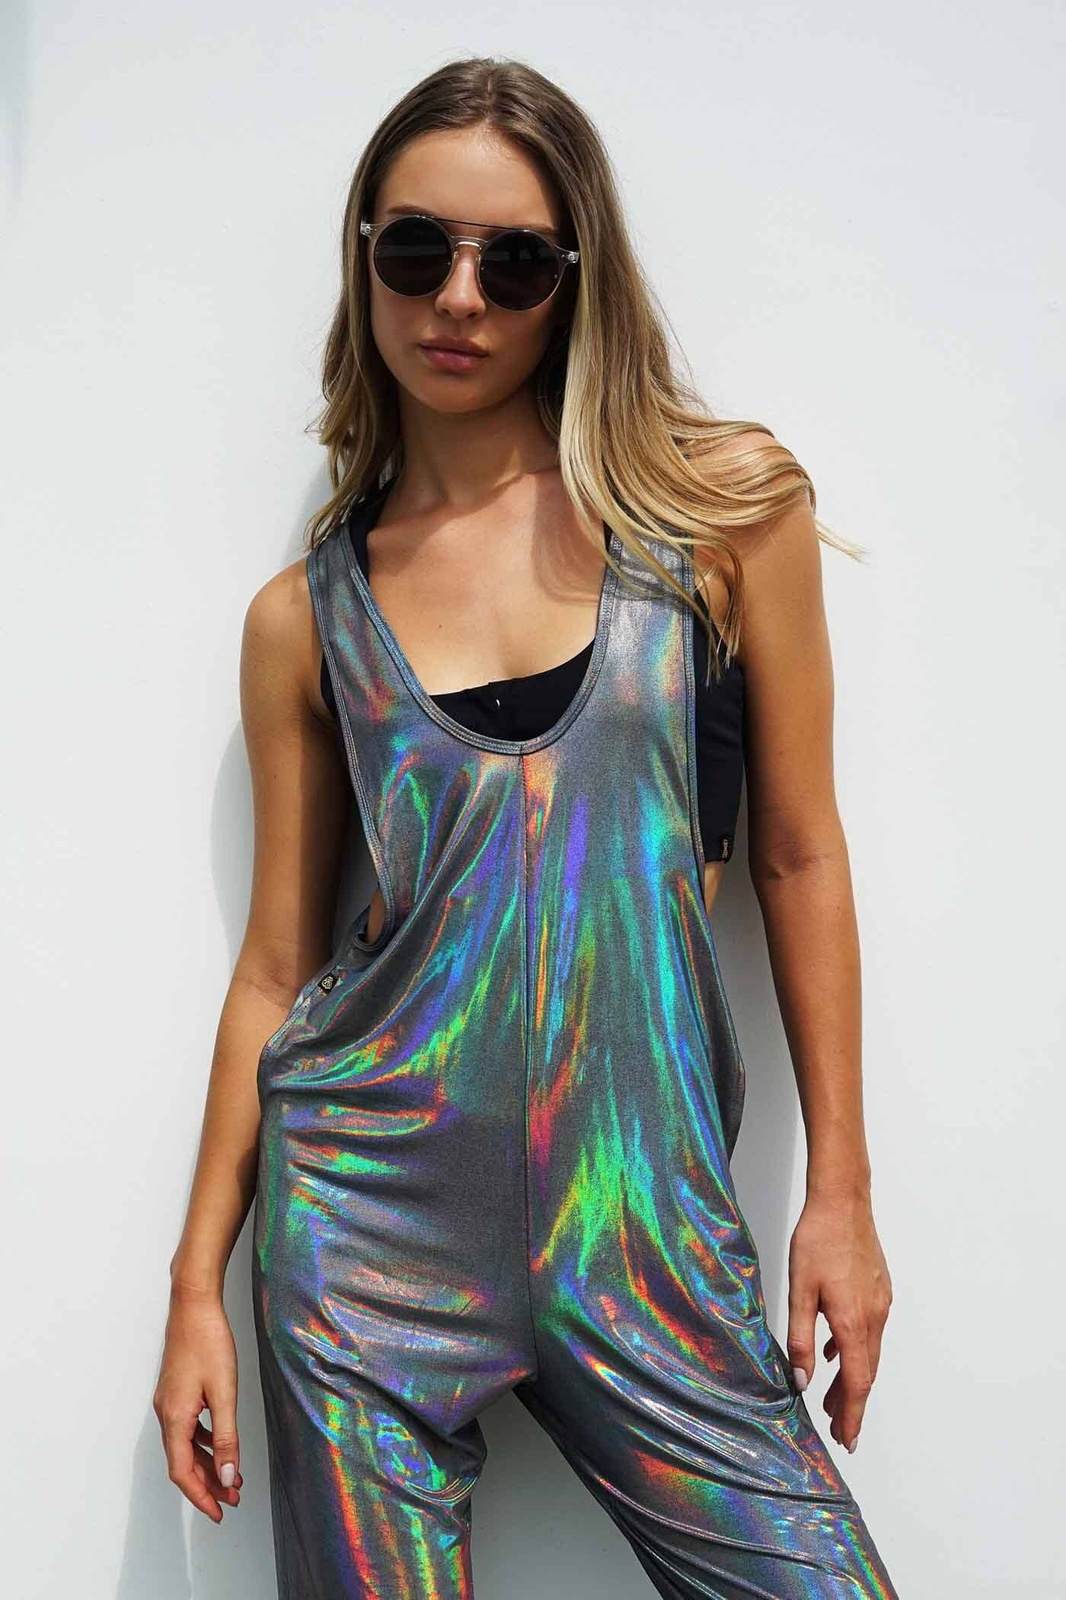 Chromatic Womens Holographic Festival Overalls from Love Khaos Rave Clothing website